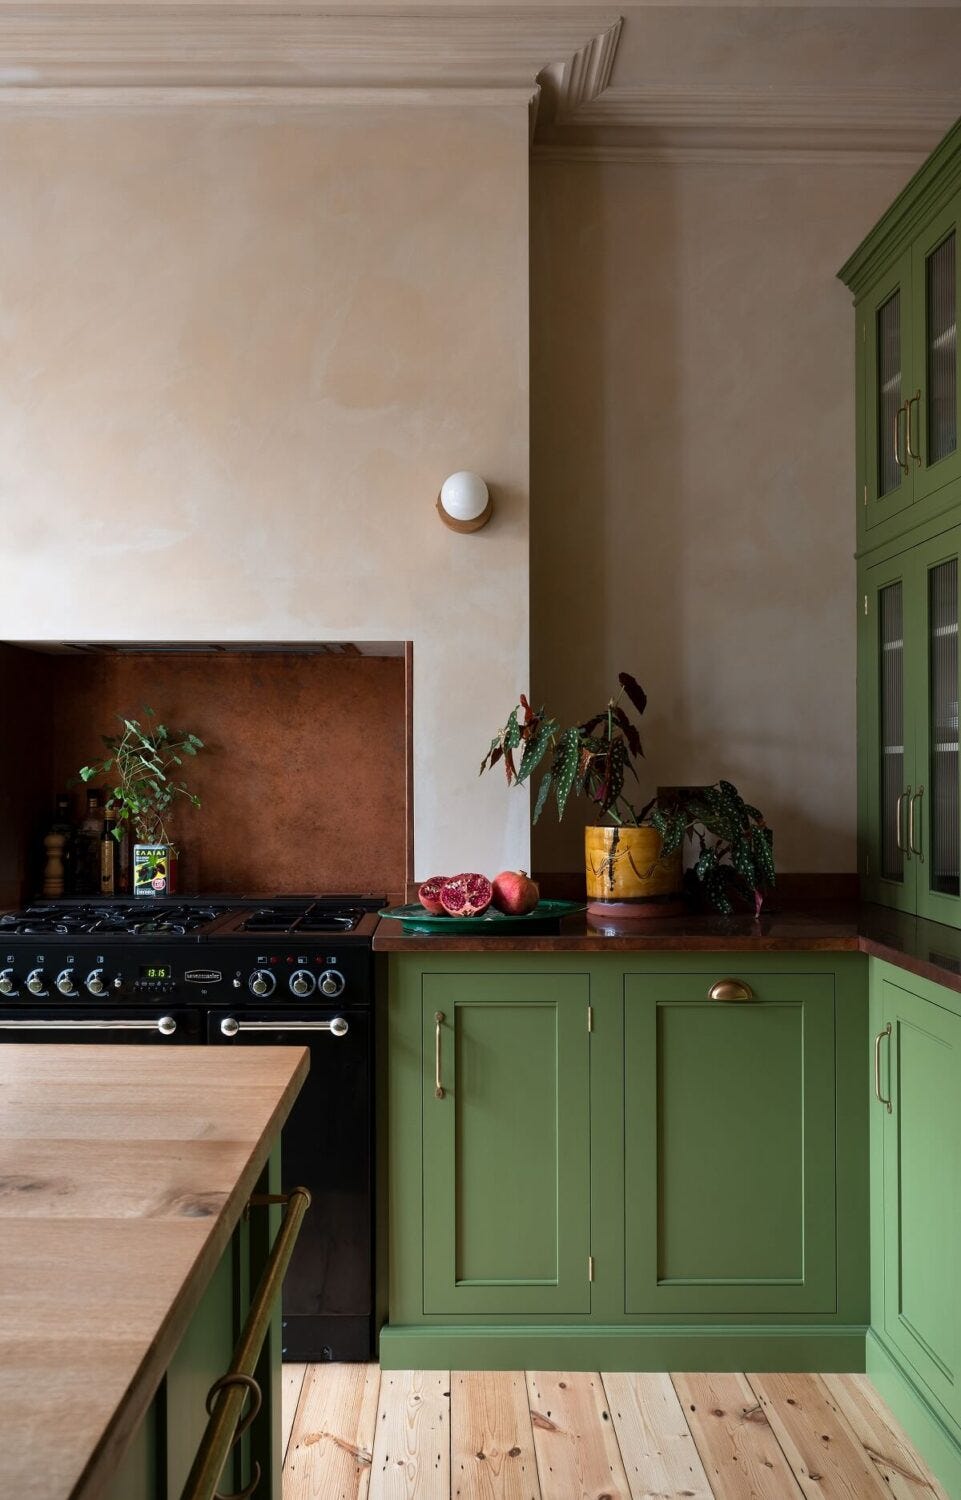 Kitchen color ideas green and dark wood